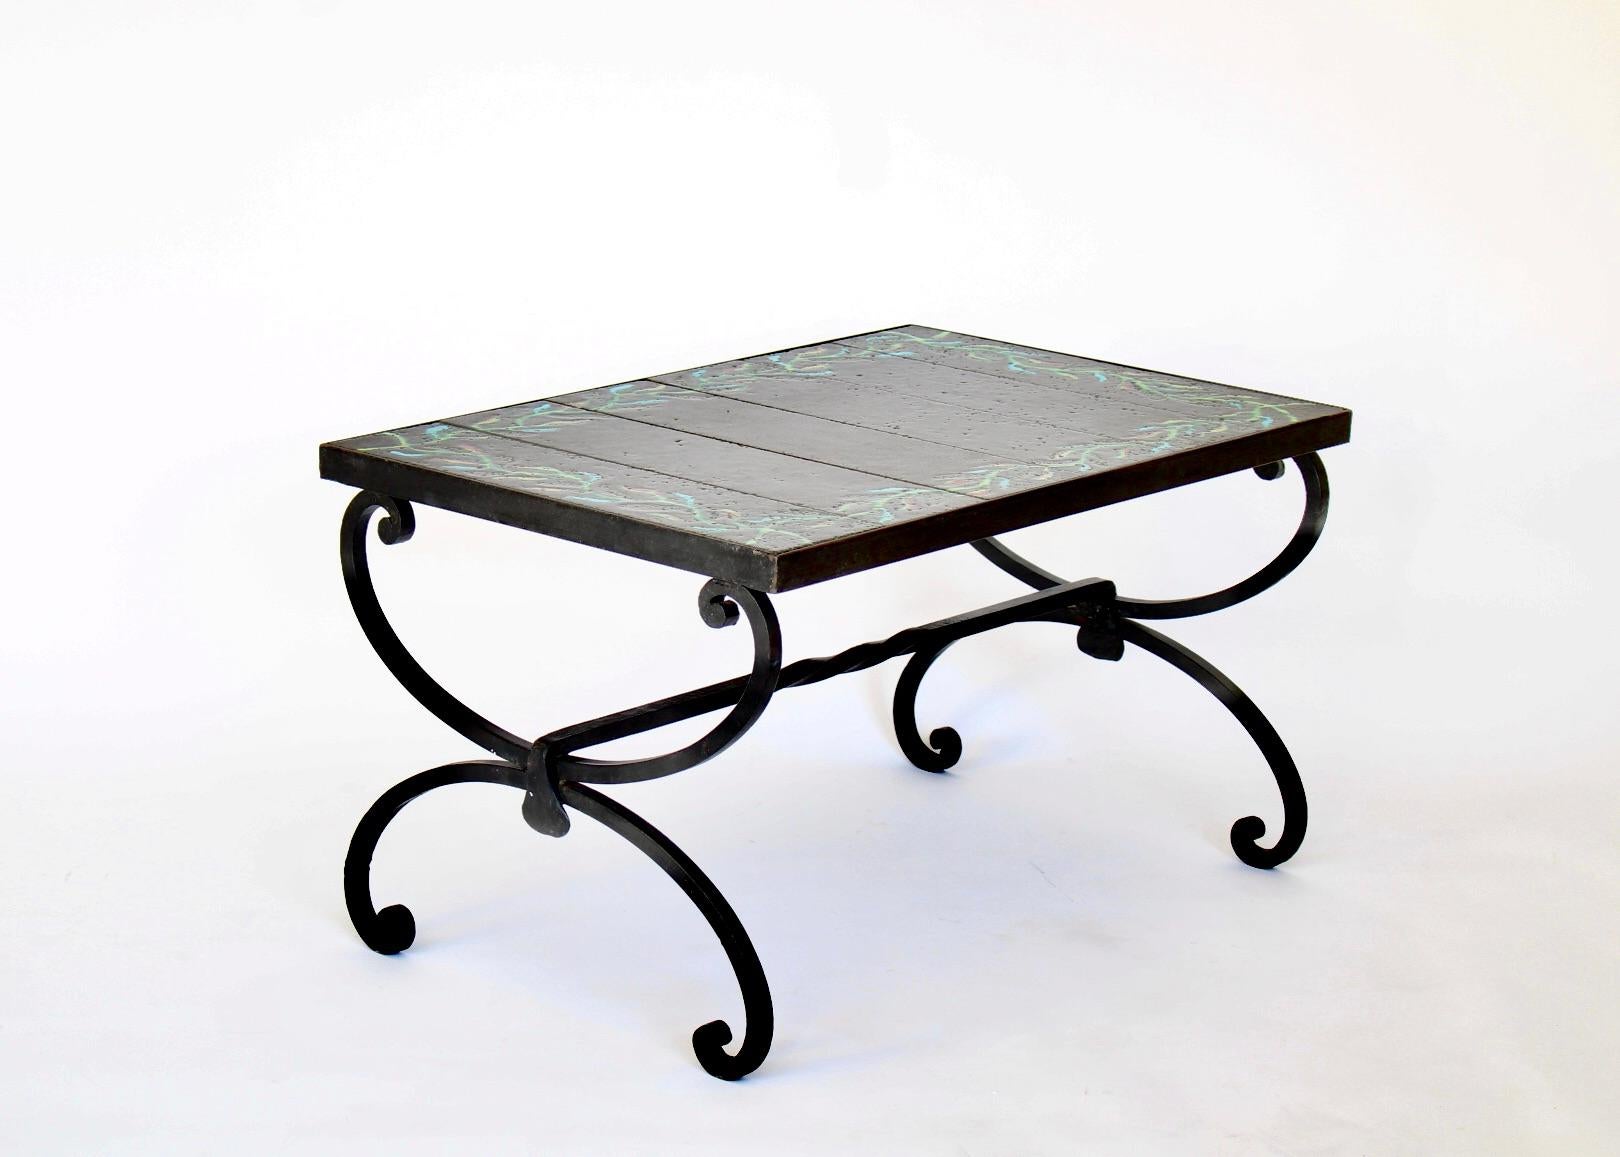 Jacques Adnet and Guidette Carbonell coffee table or side table. Use as a side table or the perfect small coffee table. Hand wrought iron base with six inset glazed ceramic tiles with a twining vine motif in shades of green, blue and touches of rust